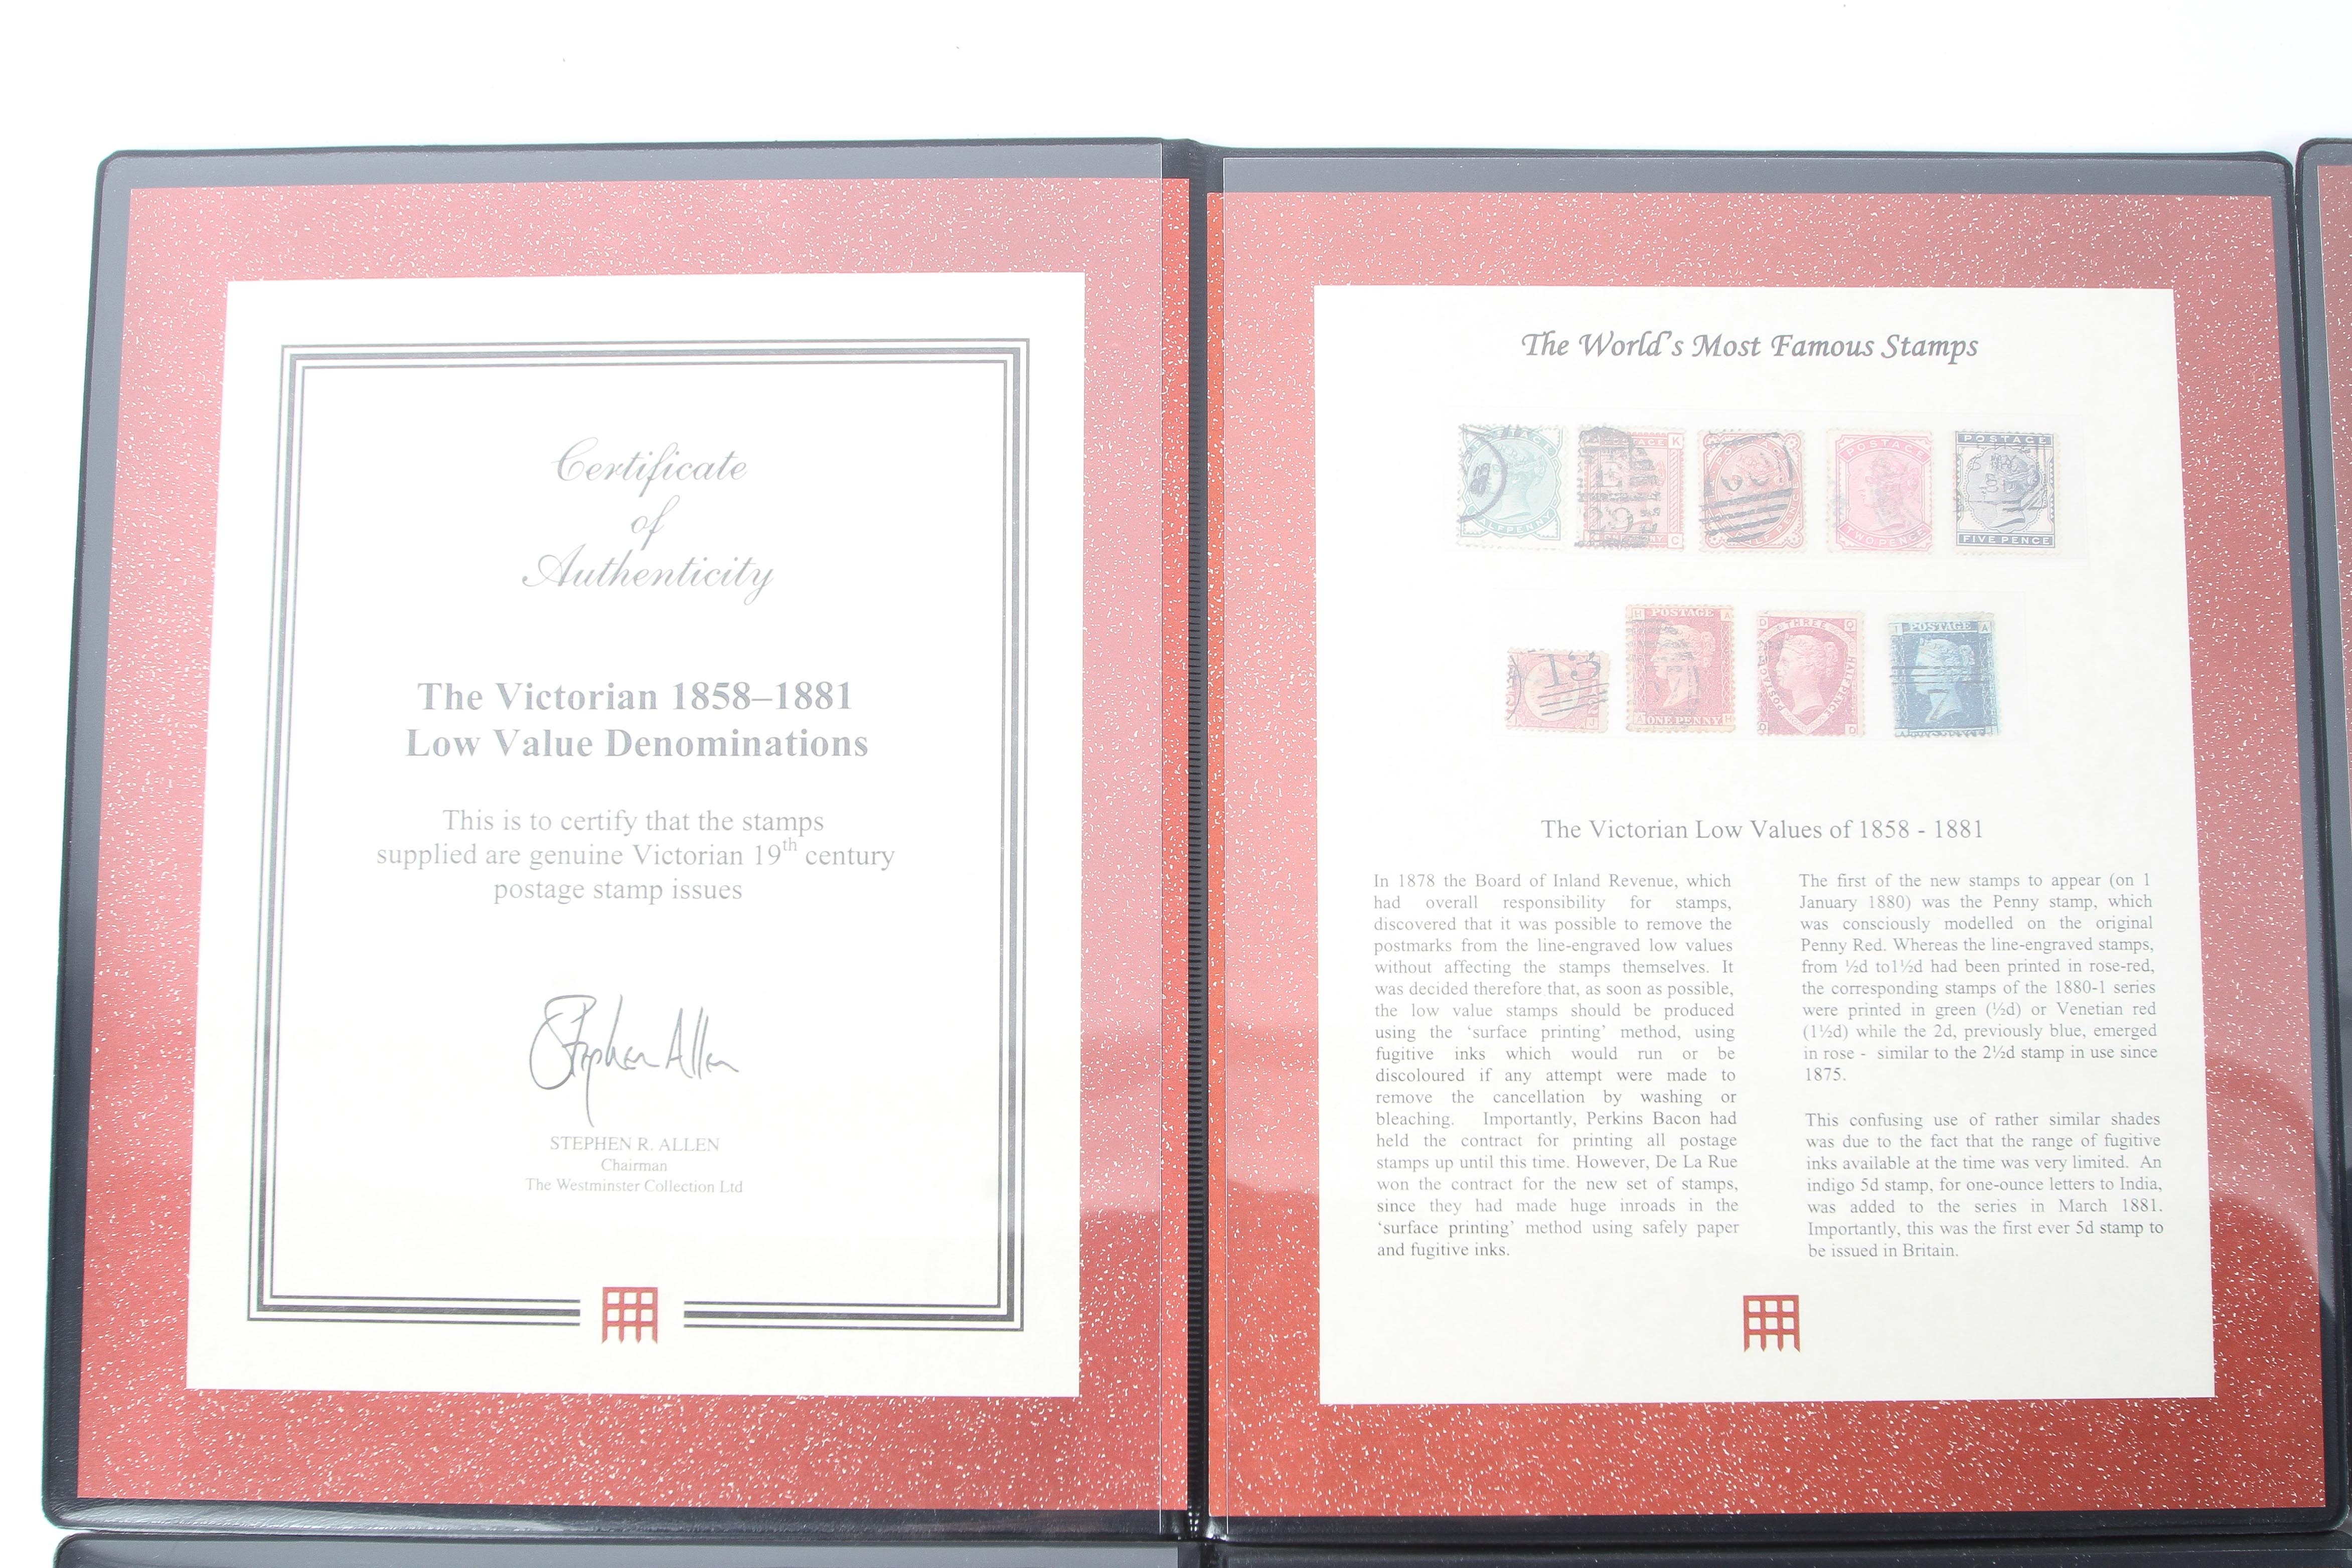 Six folders from the Westminster Collection Ltd of world famous stamps - Image 2 of 7